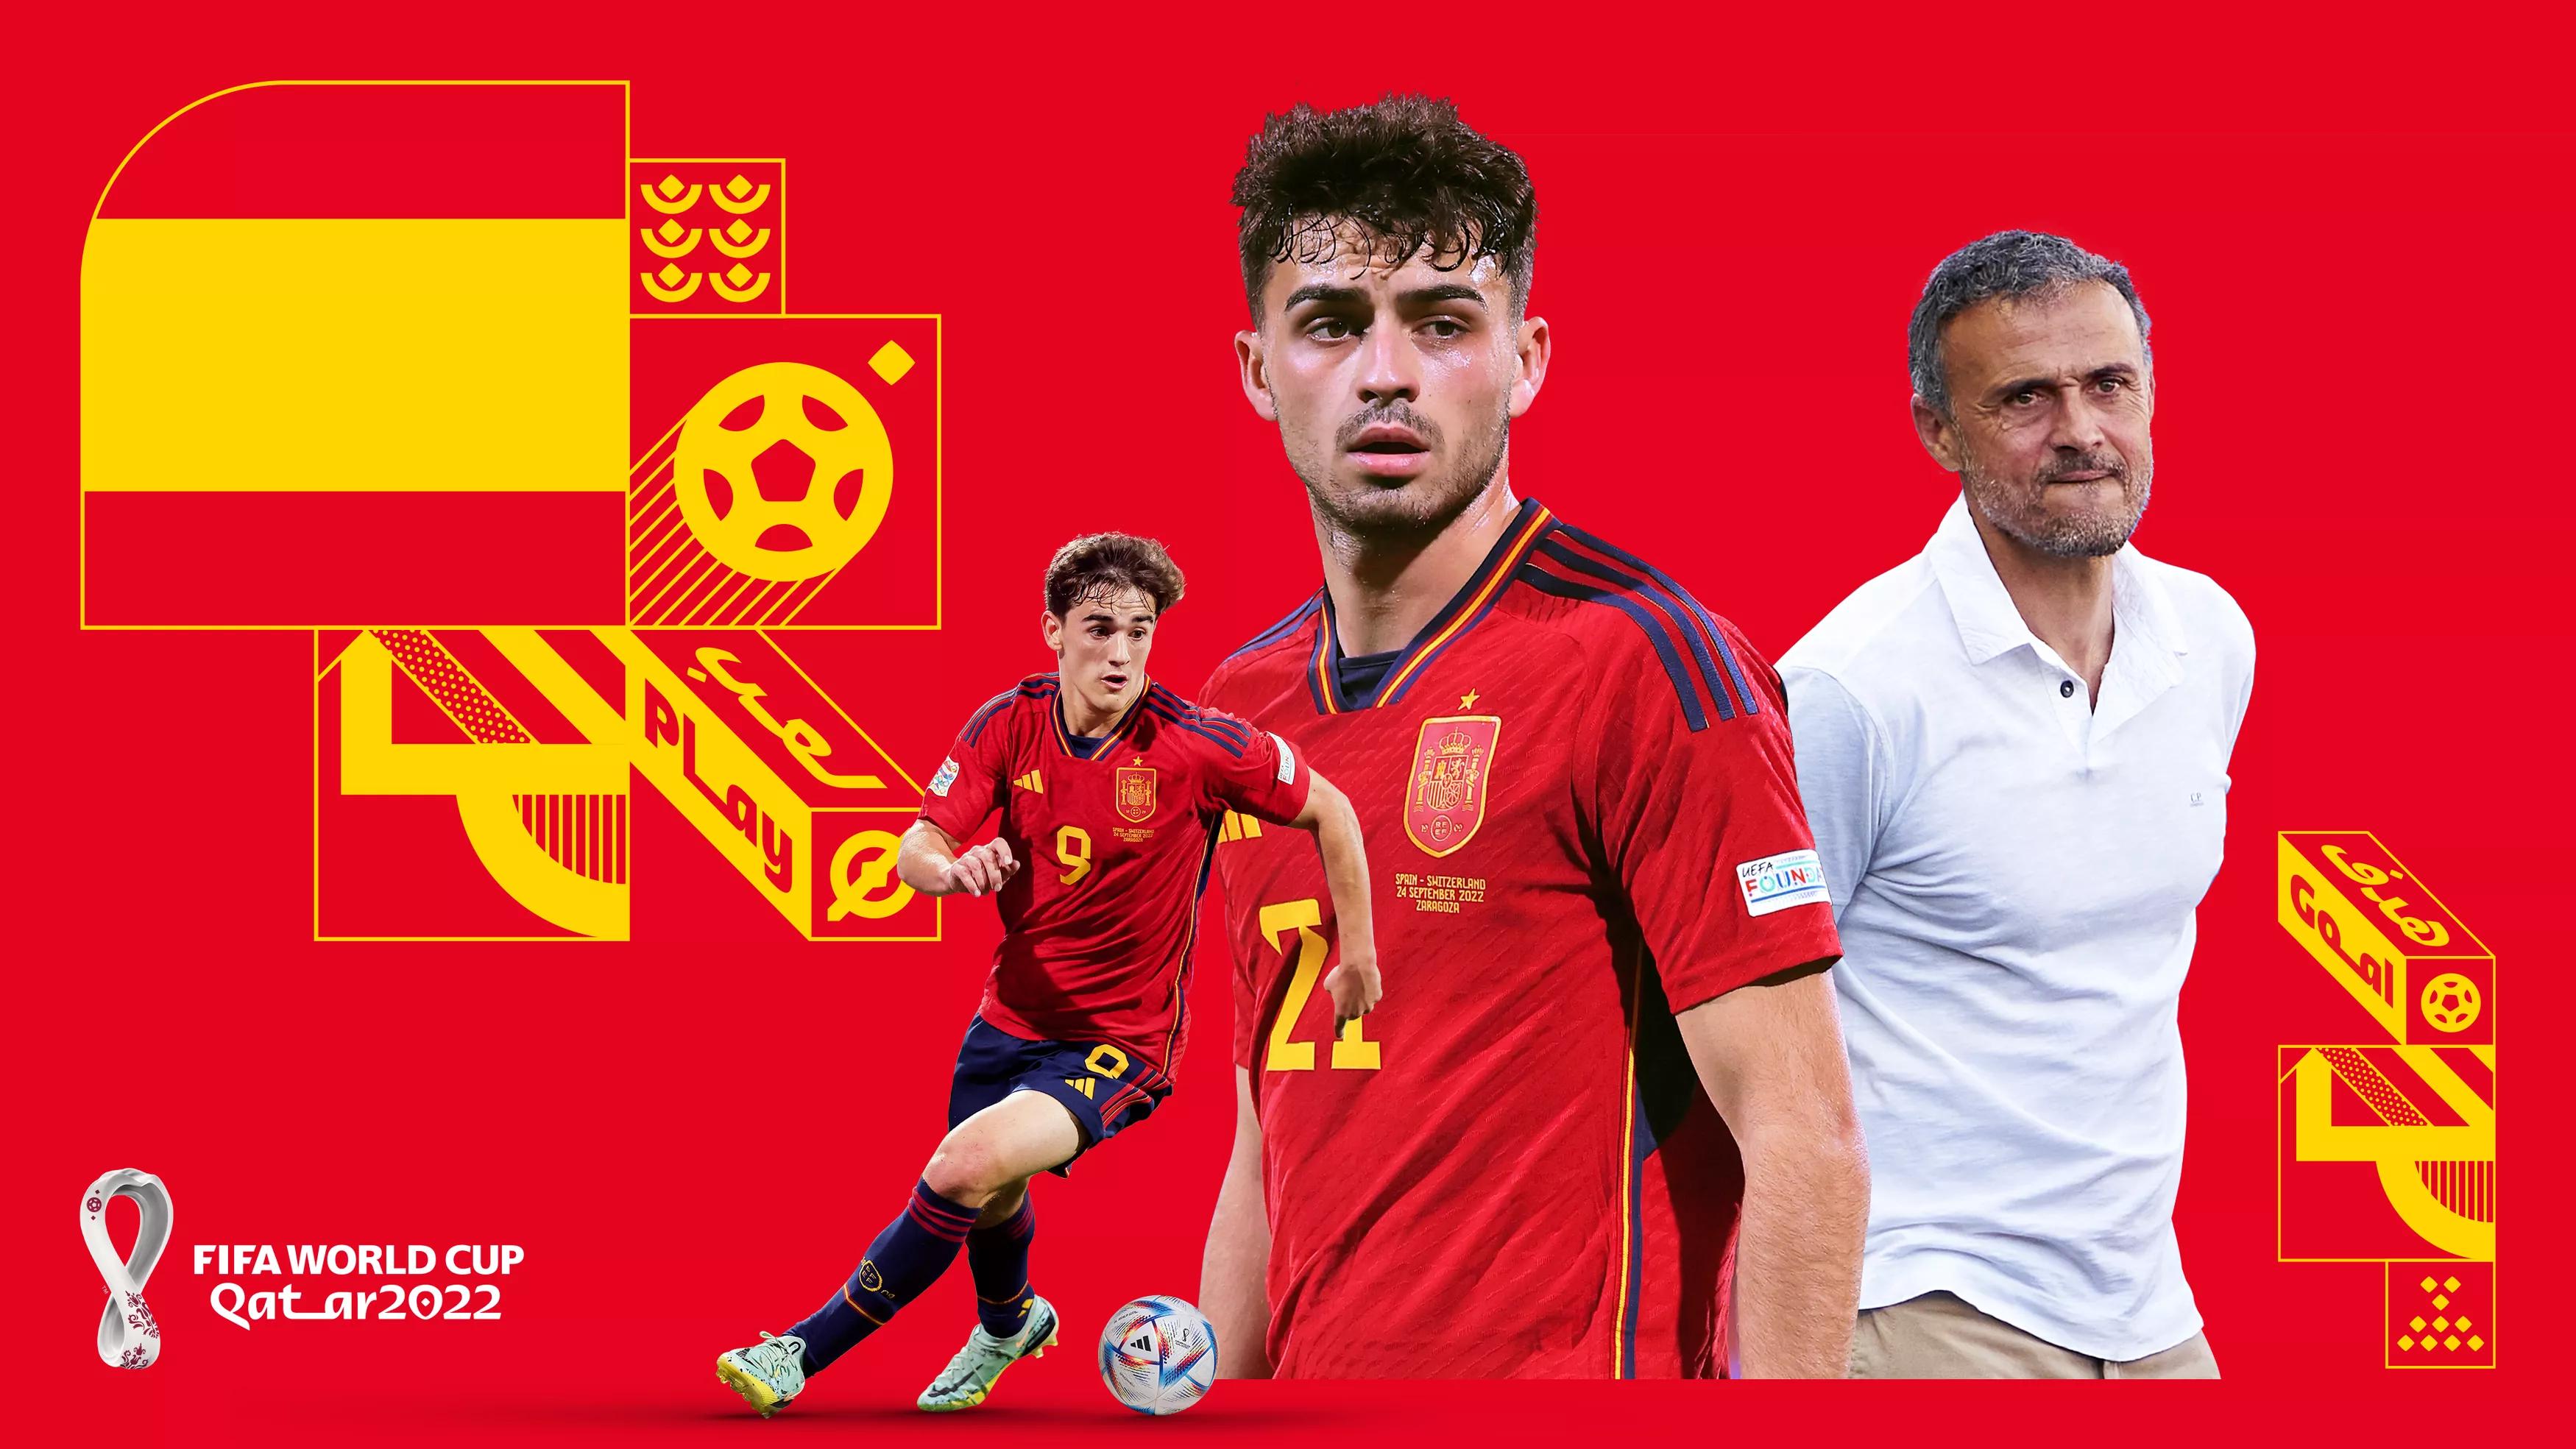 Spain World Cup 2022 Wallpapers